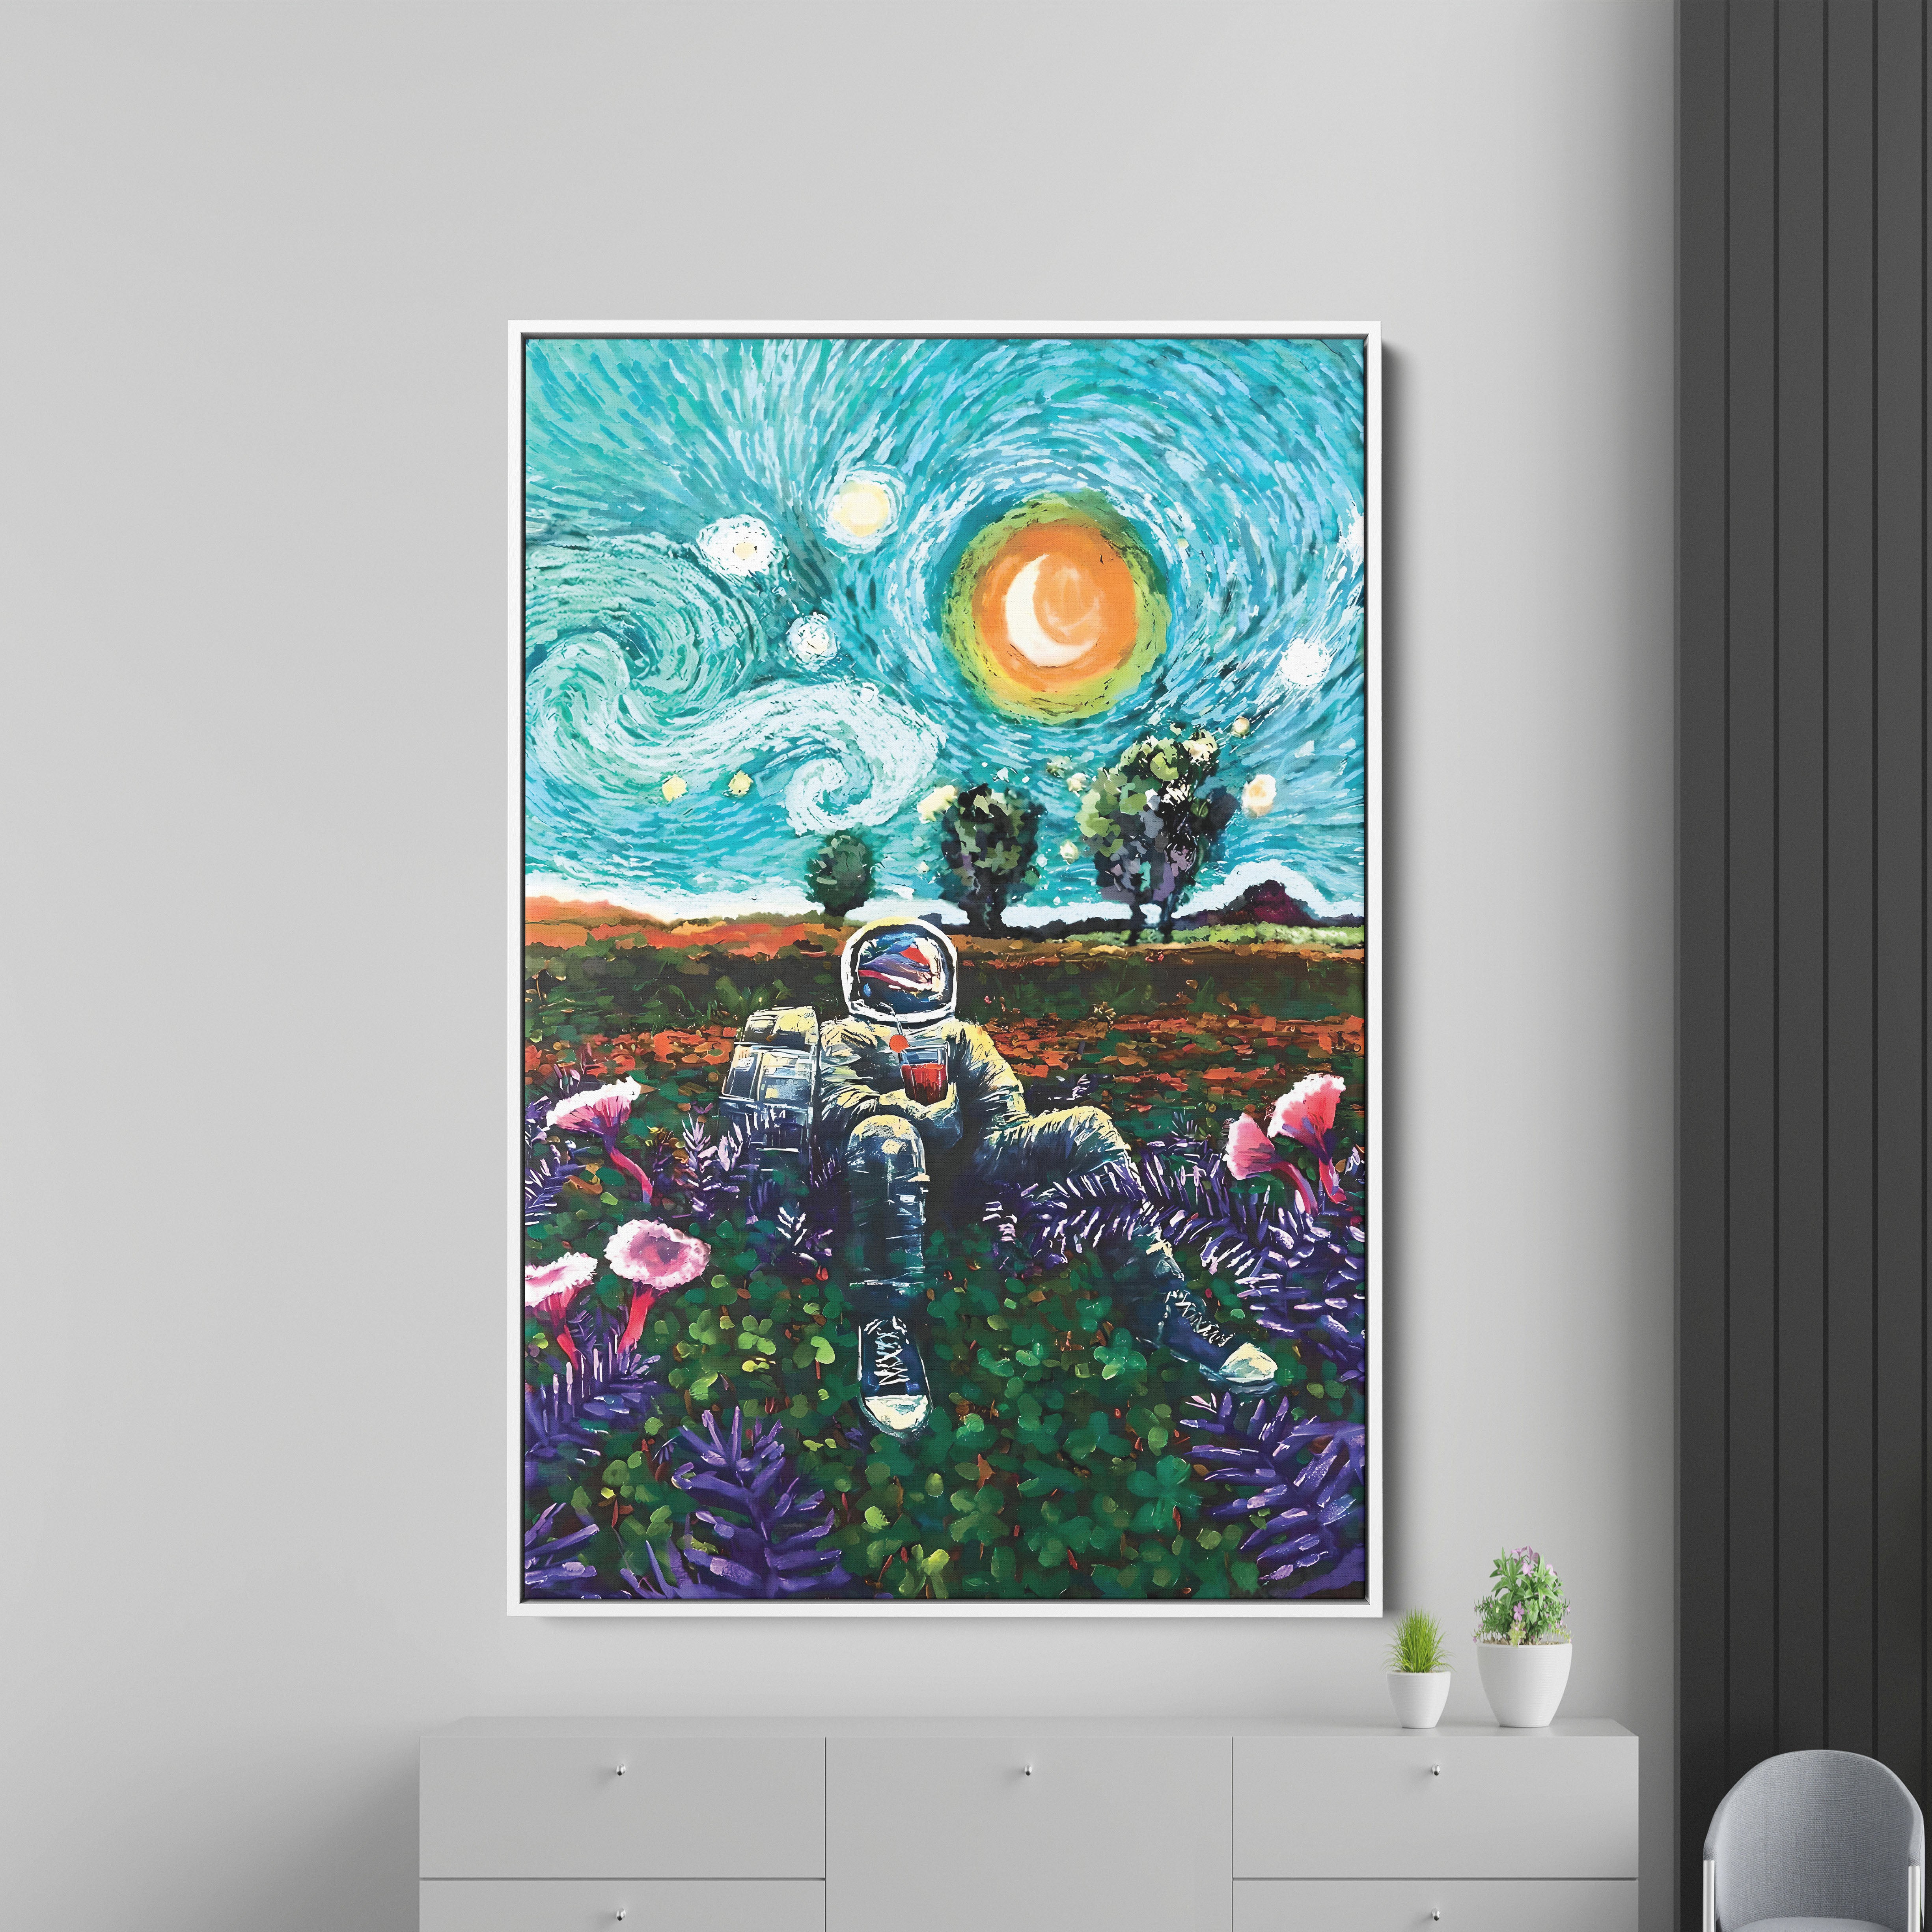 Astronaut enjoys the Starry Night Canvas Wall Painting